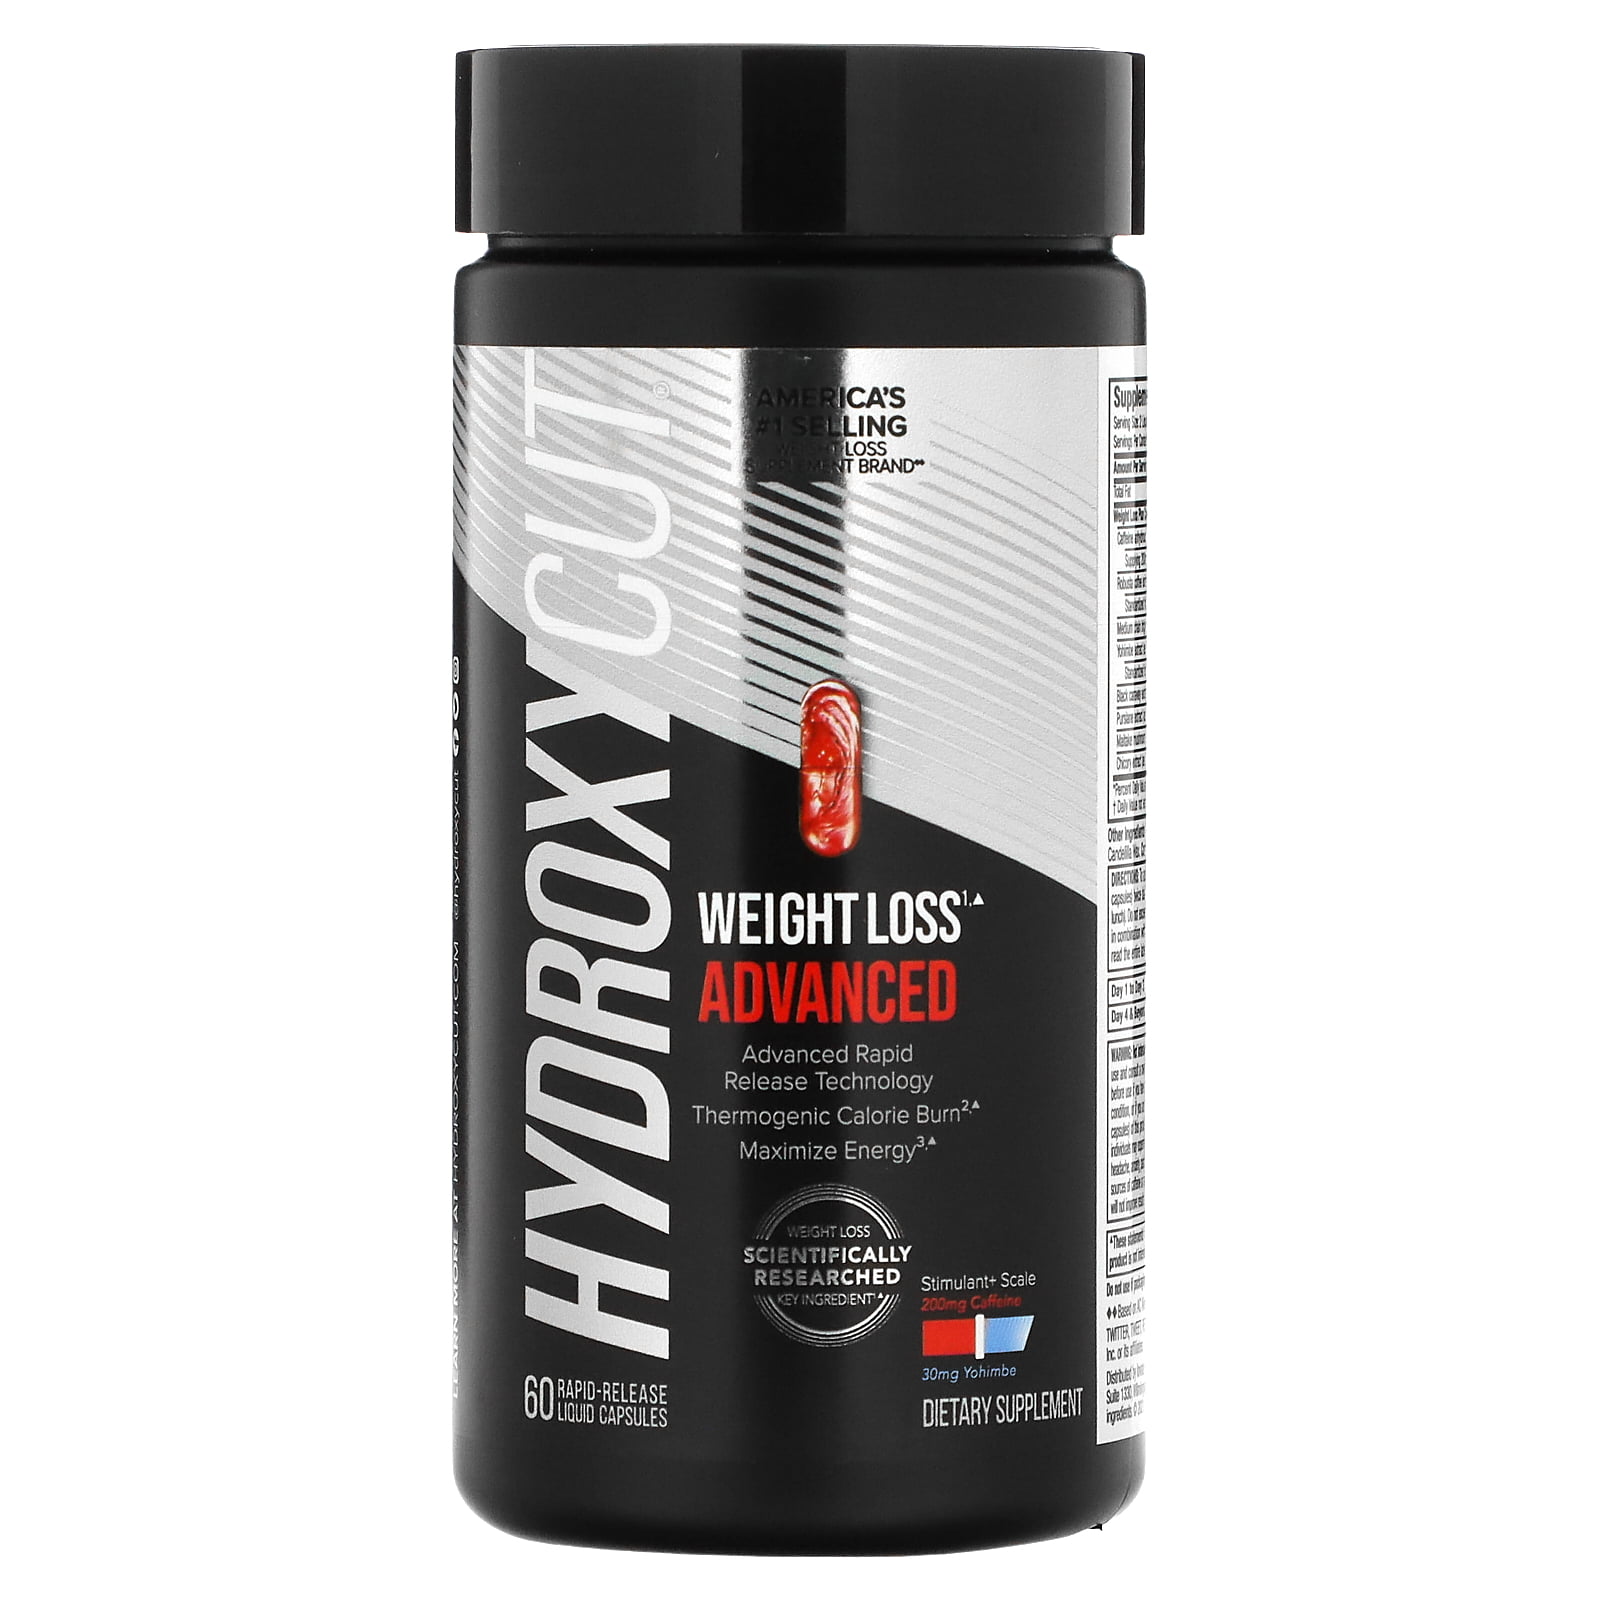 Hydroxycut Advanced Weight Loss Supplement, Intense Weight Loss, Maximum Energy + Metabolism Boost, 60 Count